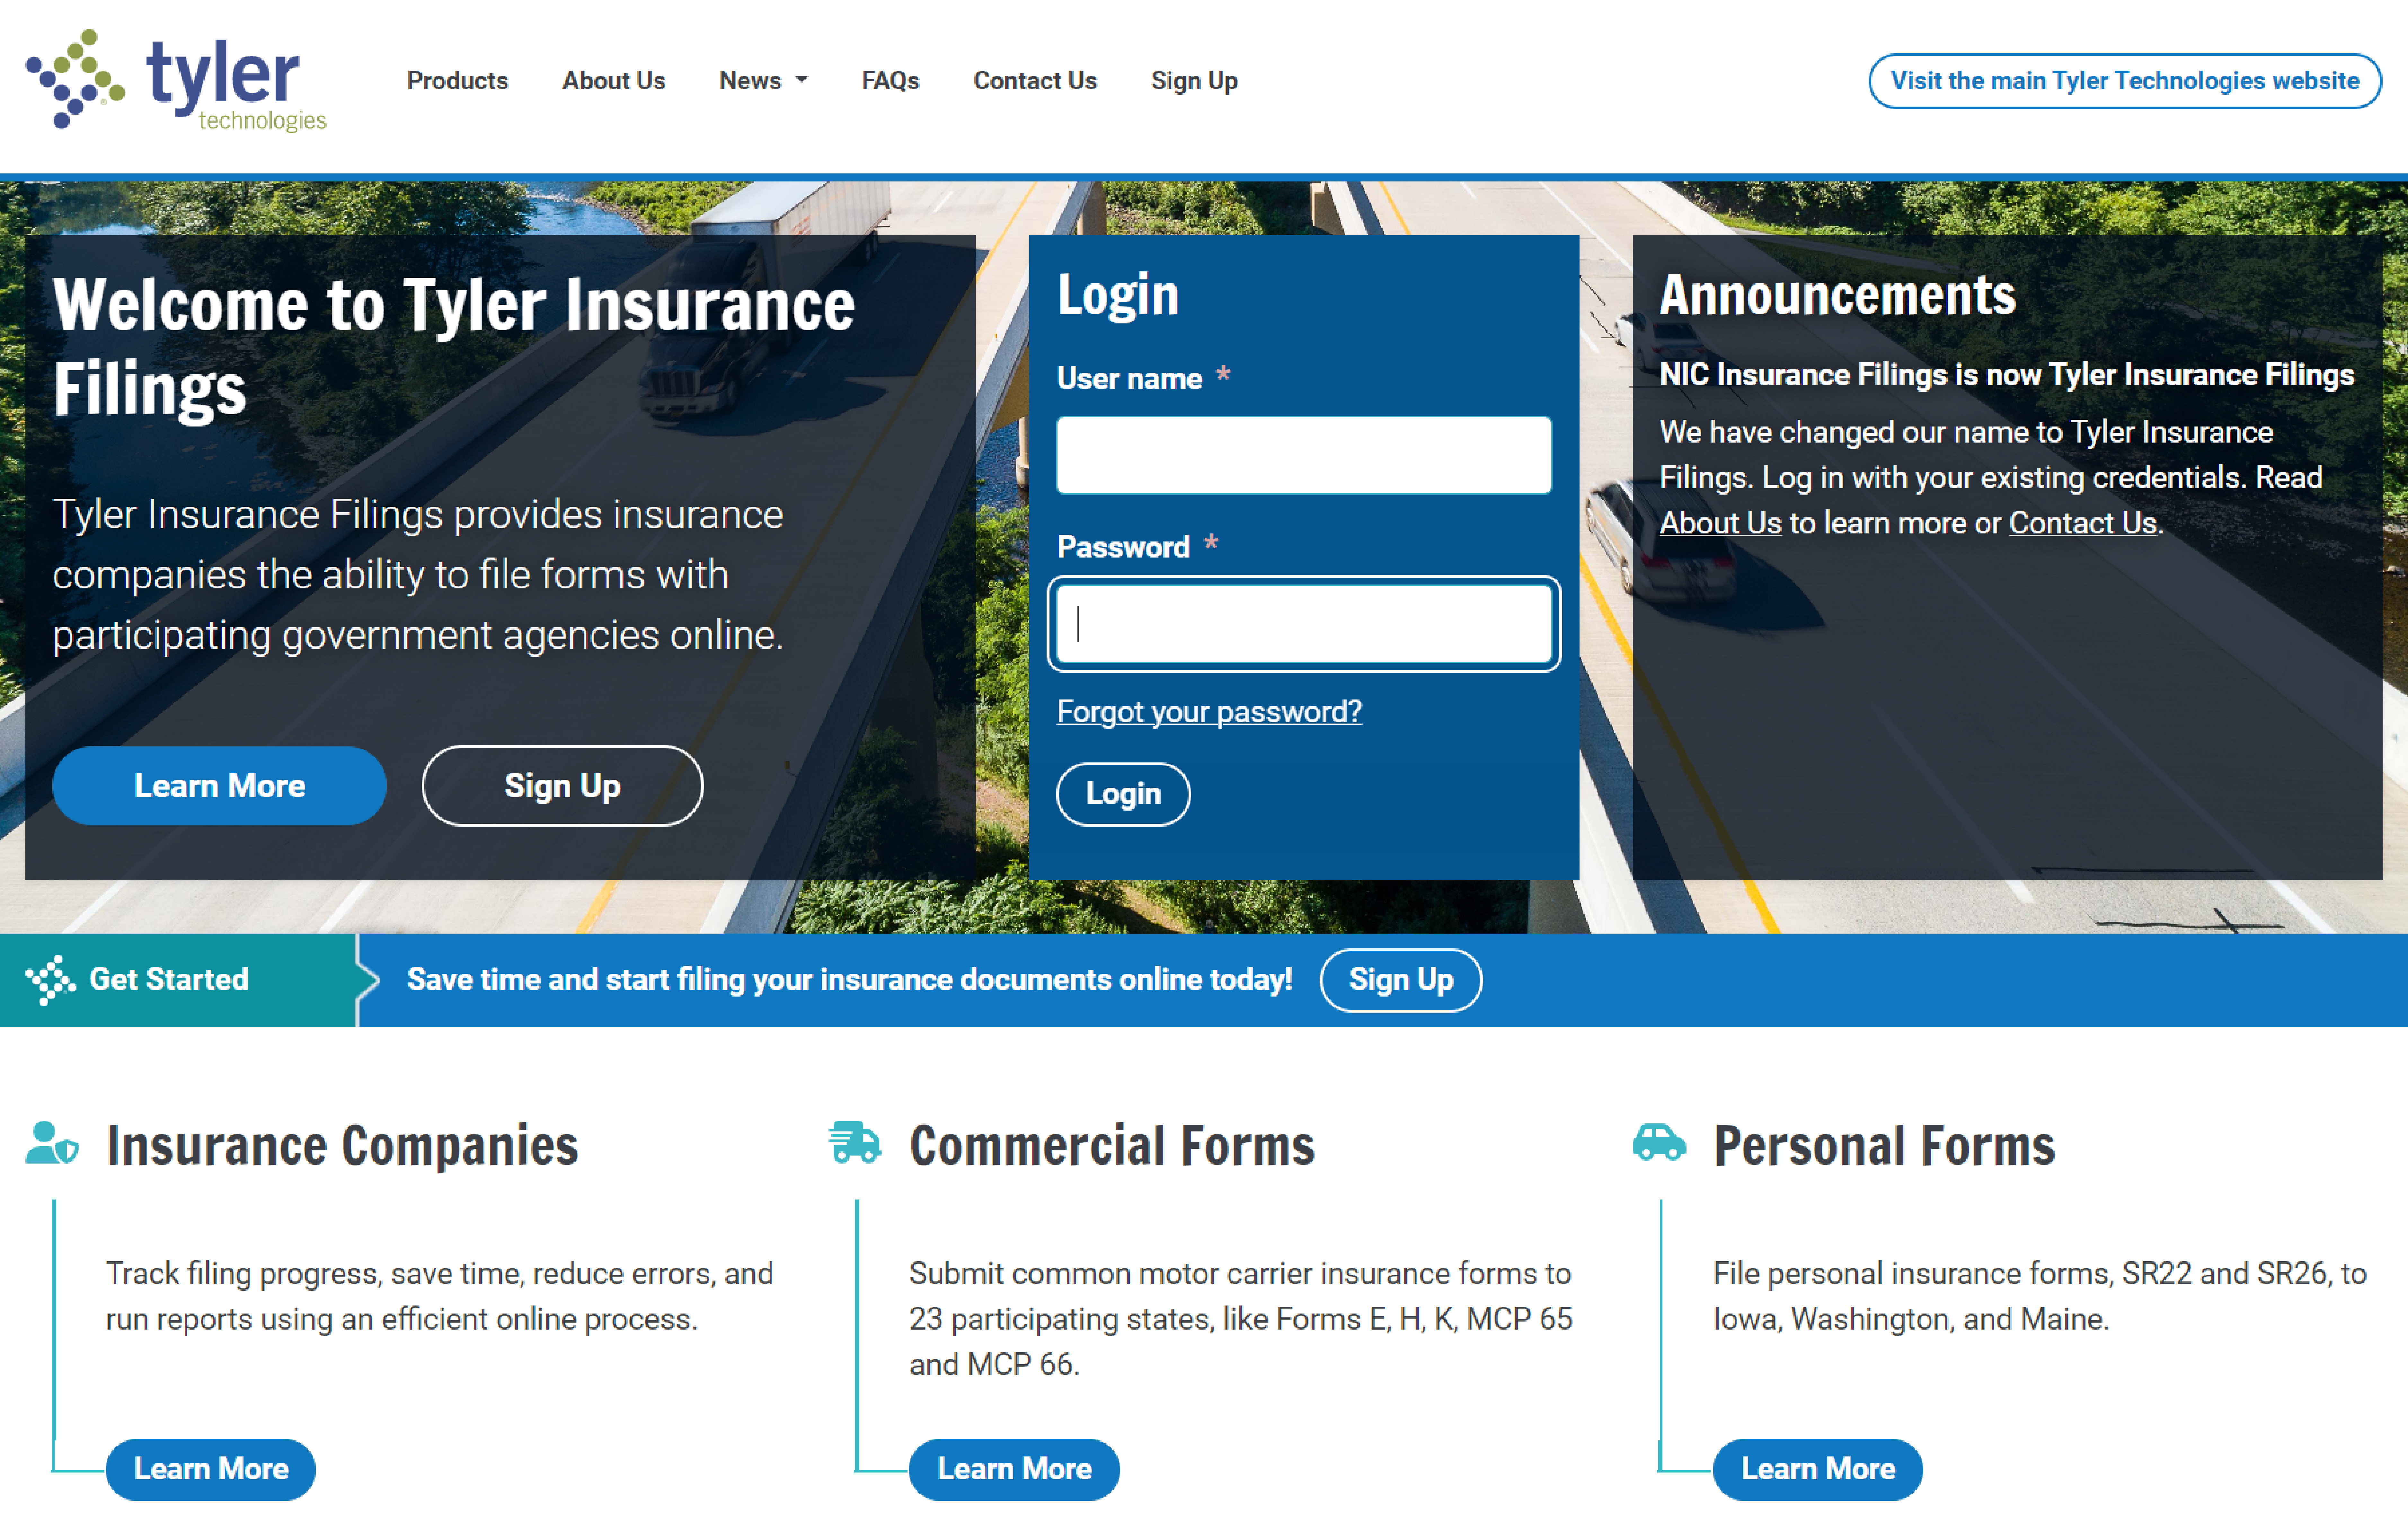 The updated Homepage for Tyler Insurance Filings features a new logo and navigation options.